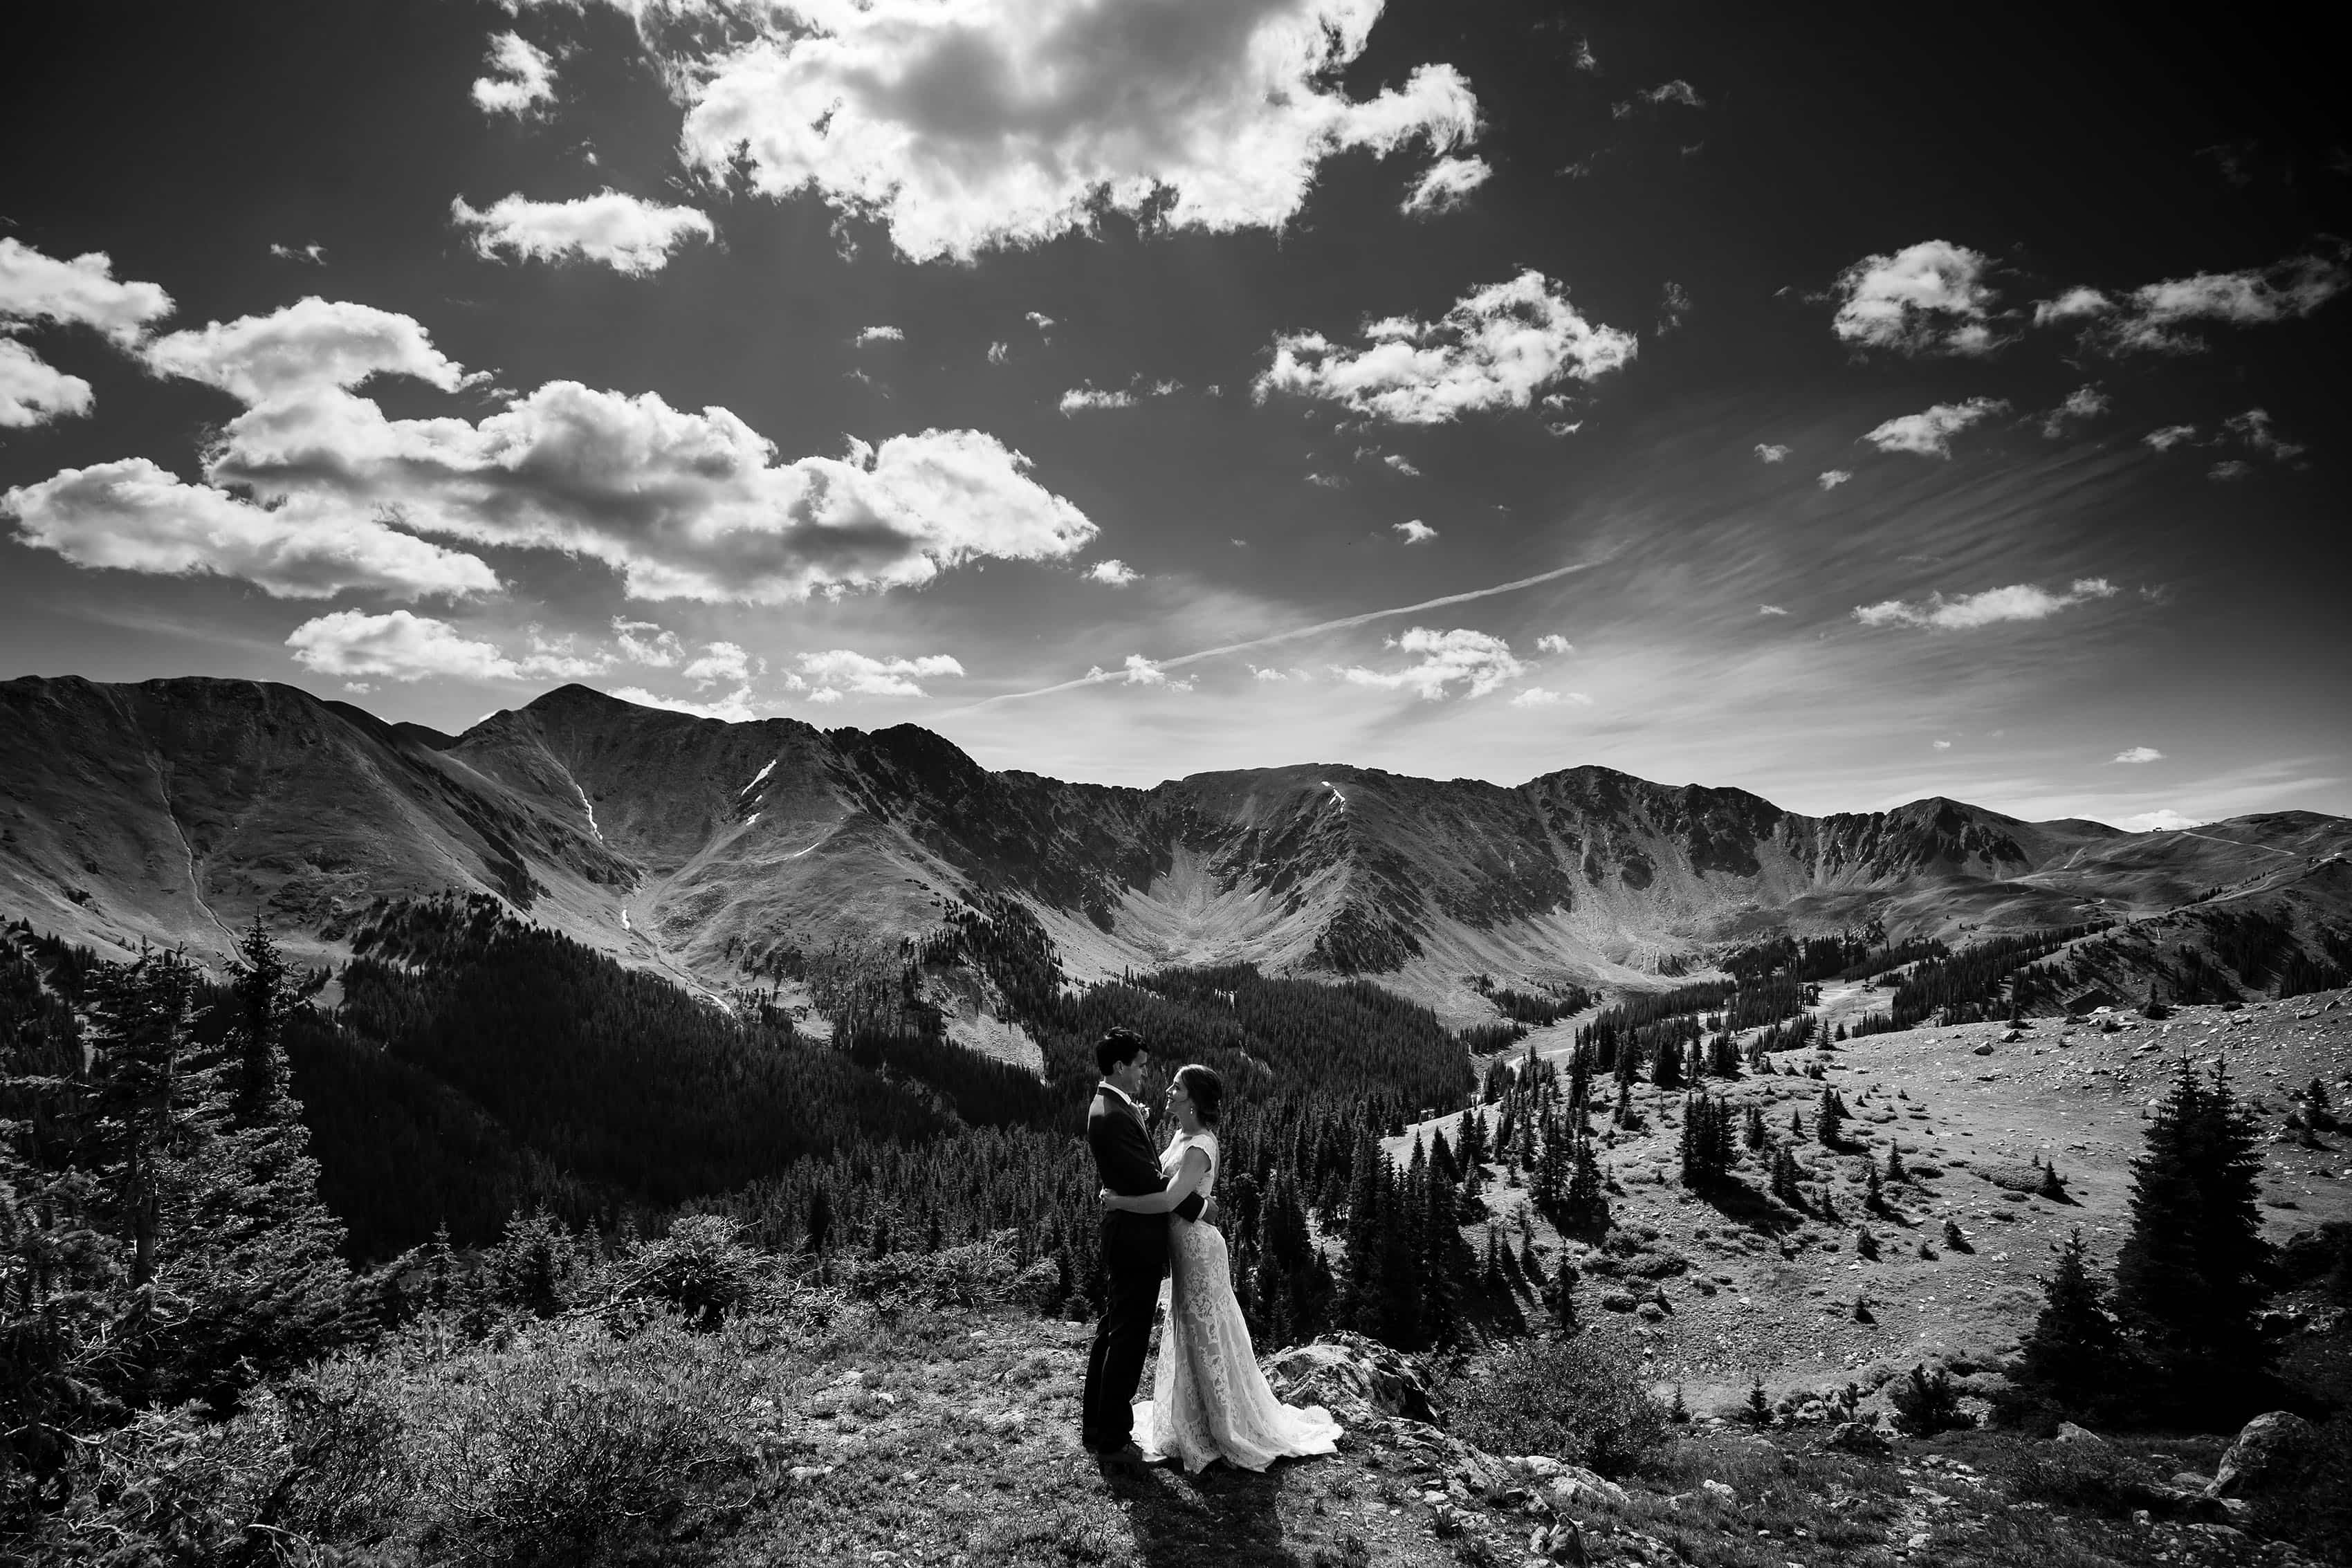 The bride and groom share a moment together atop Loveland Pass near Keystone, Colorado